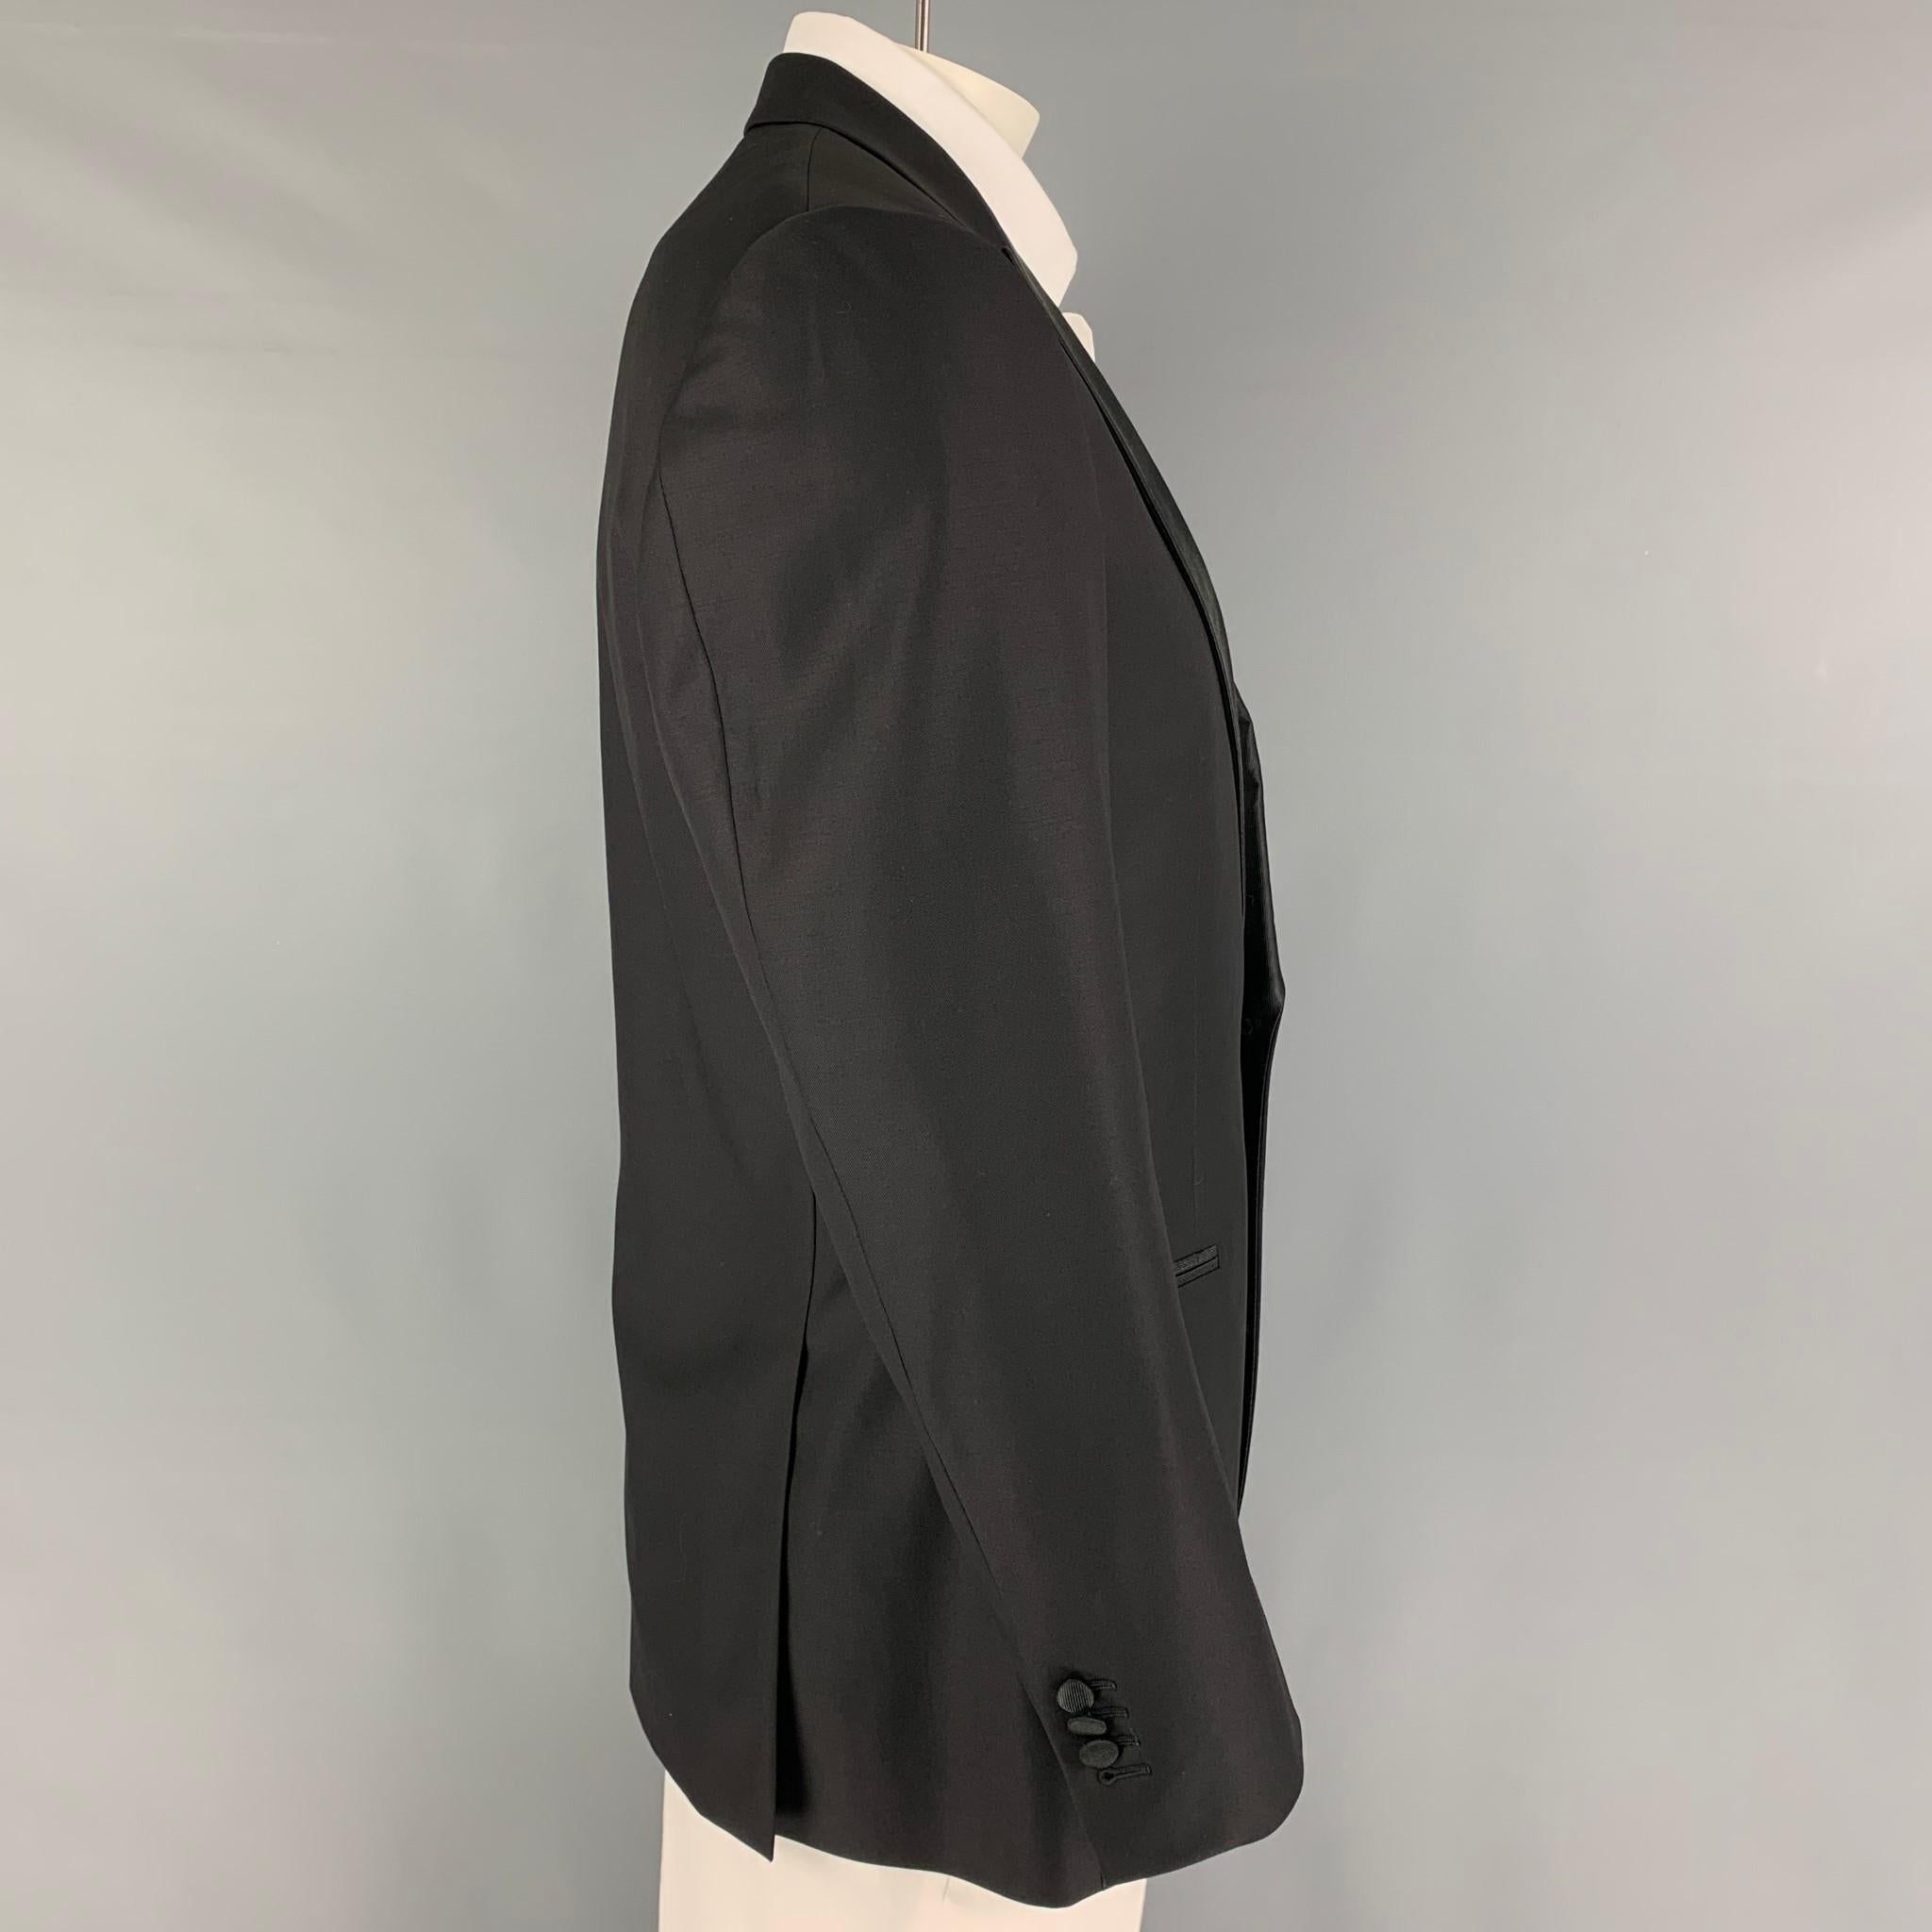 SUIT SUPPLY sport coat comes in a black wool  with a full liner featuring a peak lapel, slit pockets, double back vent, and a single button closure.

Excellent Pre-Owned Condition.
Marked: 44

Measurements:

Shoulder: 18.5 in.
Chest: 42 in.
Sleeve: